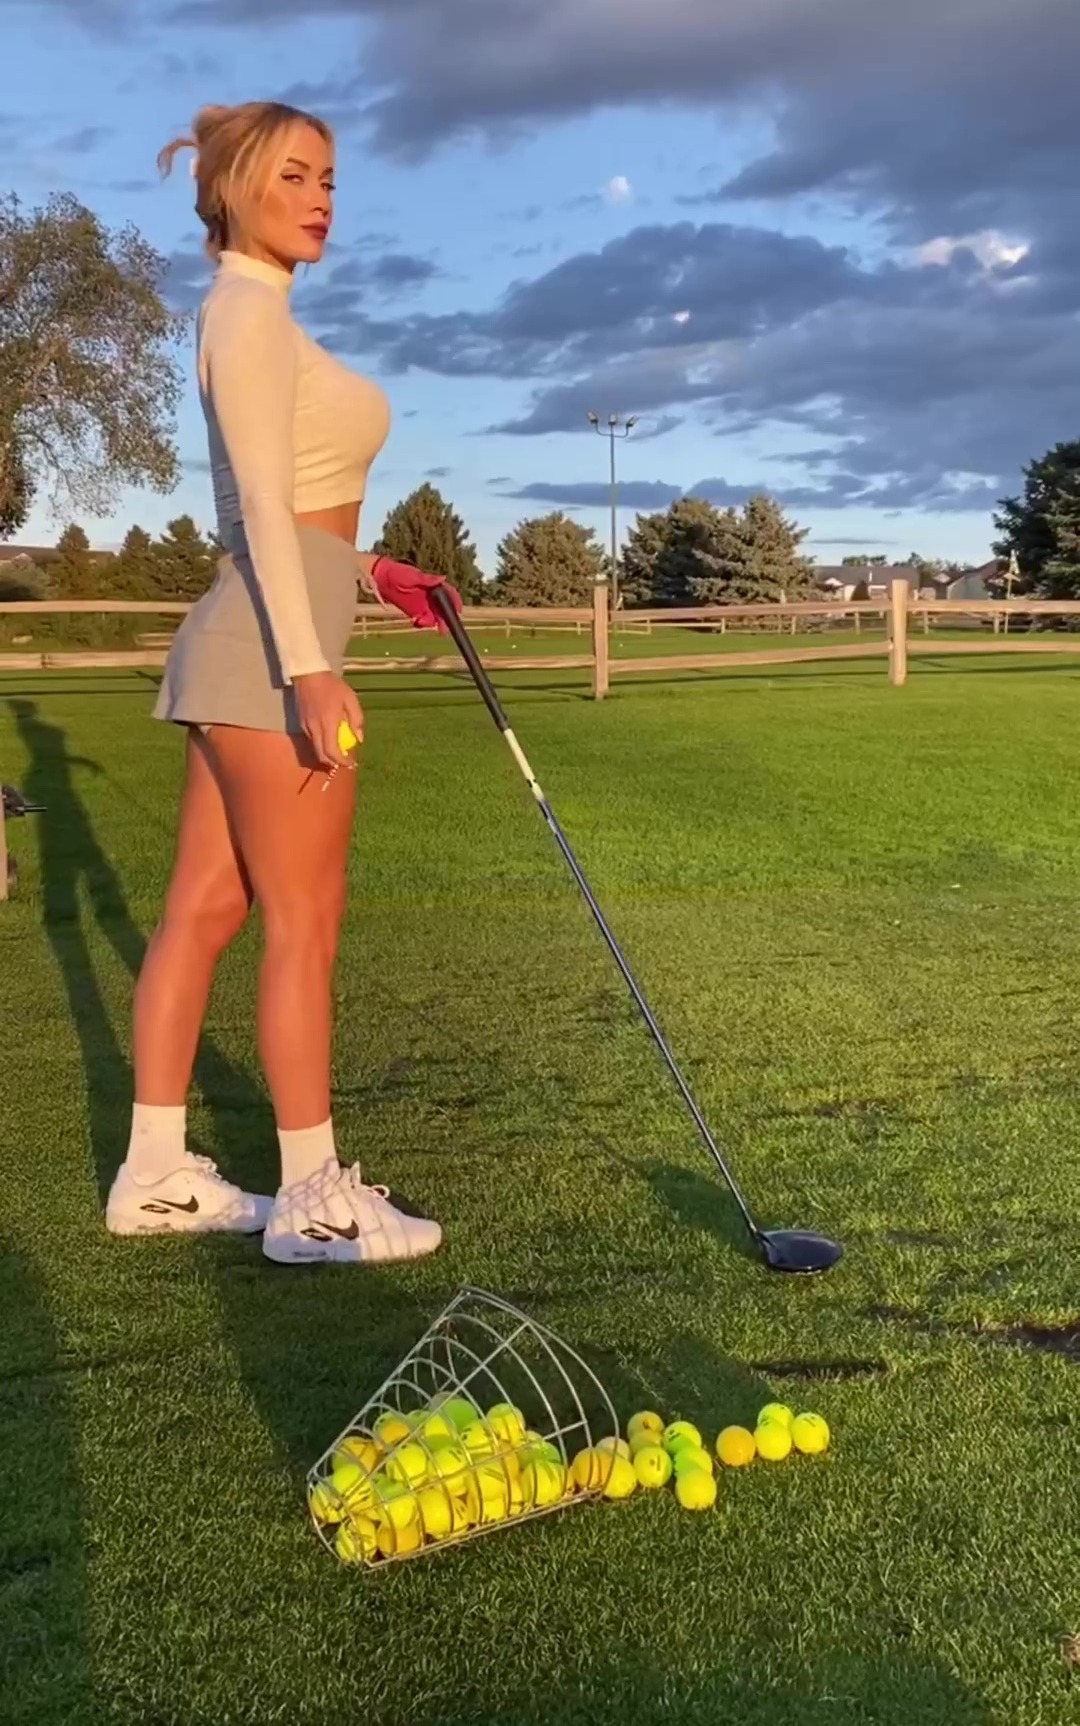 , Stunning golf influencer Paige Spiranac leaves fans in awe of natural beauty with rare make-up free Instagram upload